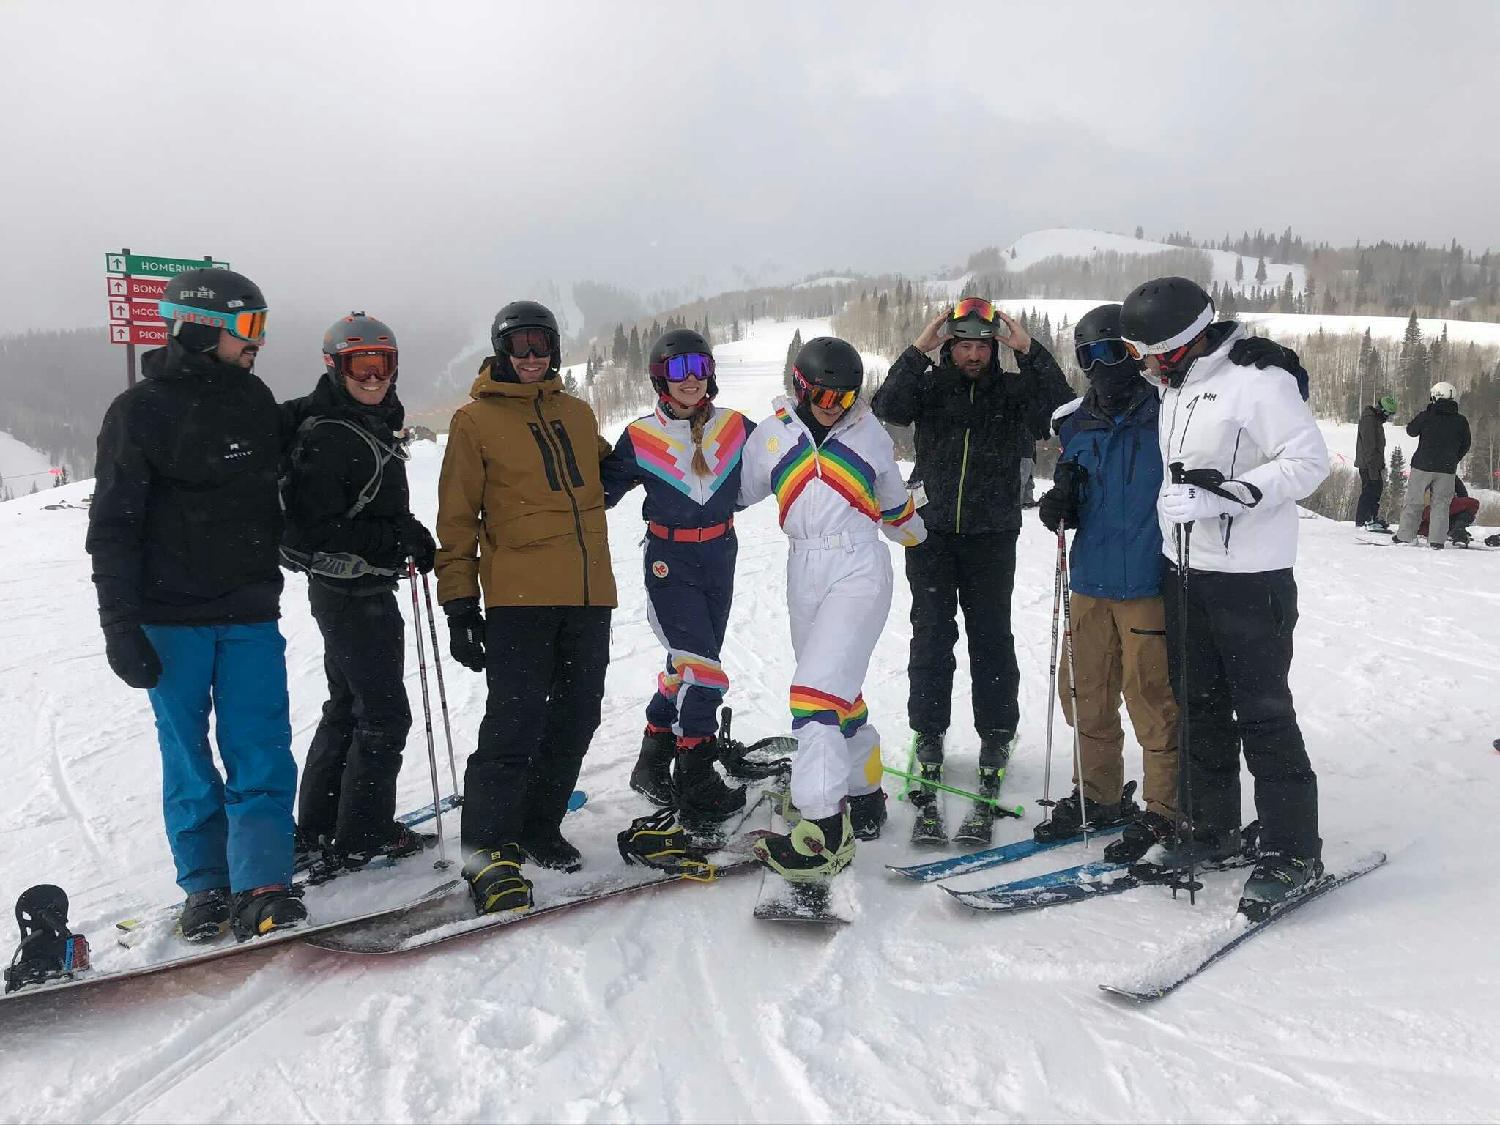 Our team enjoying the slopes in Park City Utah on our annual incentive trip celebrating all the goals we accomplished. 